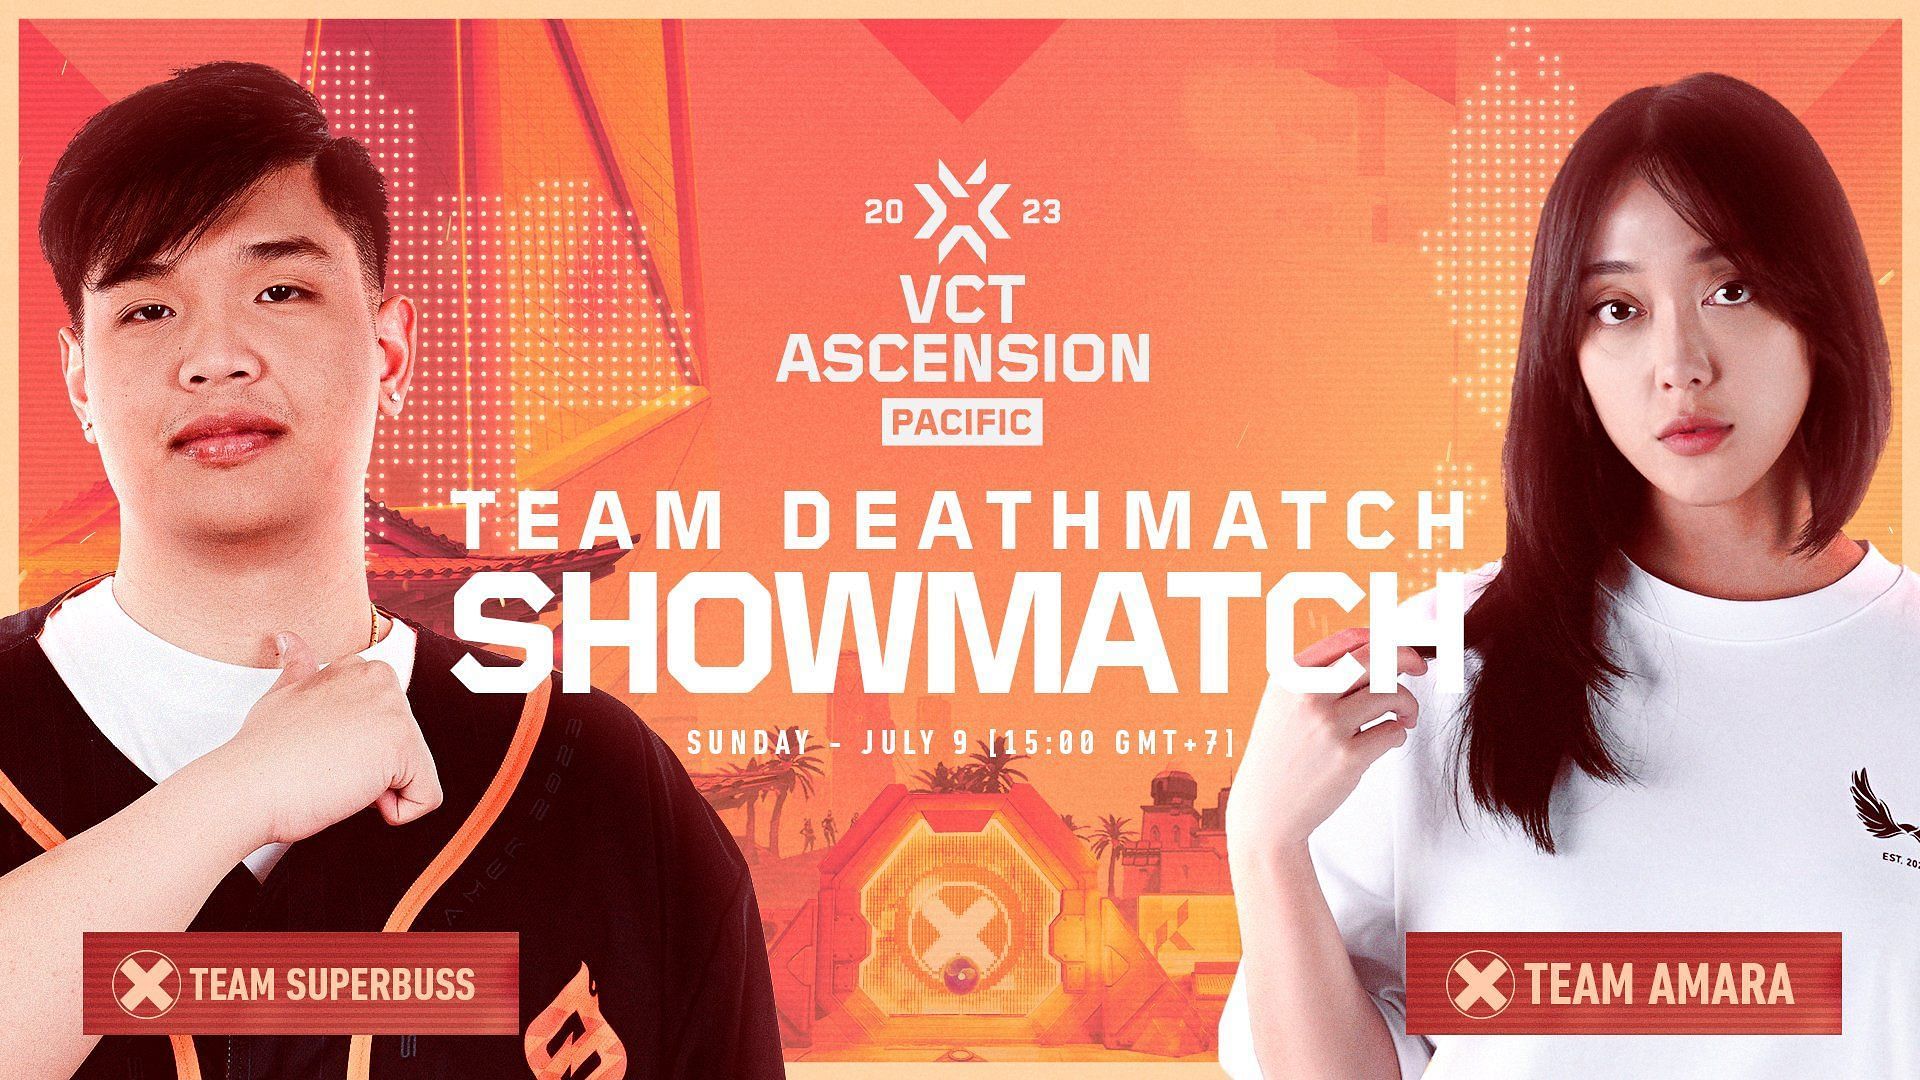 VCT Ascension Pacific will include an exciting showmatch event (Image via VCT Pacific)